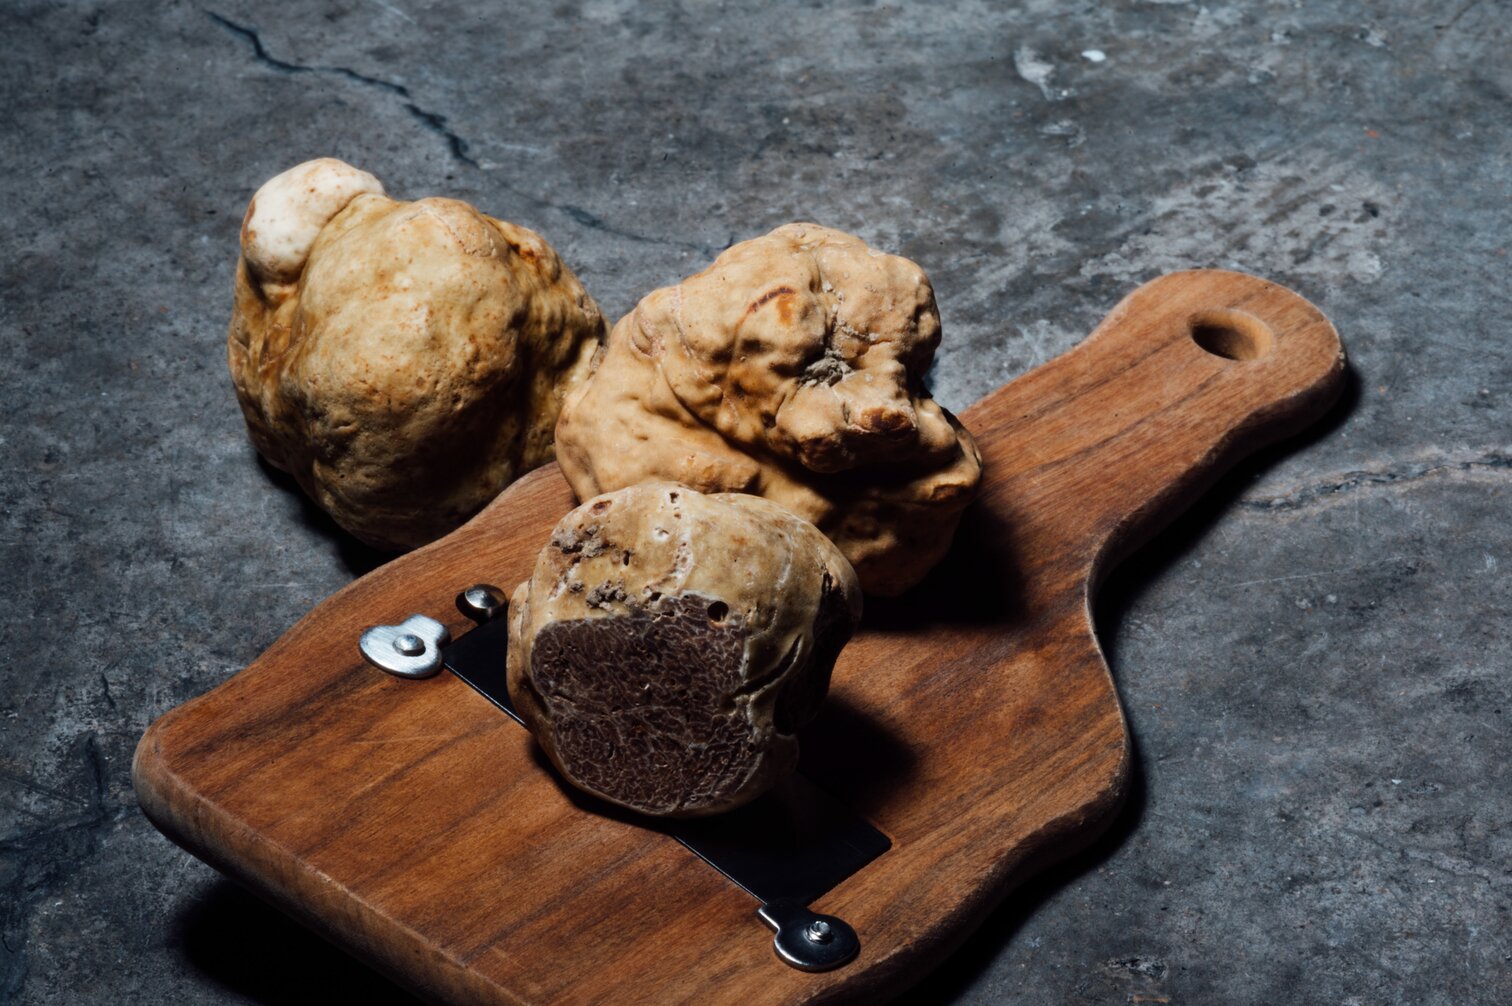 French Epicenter: France is renowned for its production of black truffles, particularly in the regions of Périgord and Provence. French black truffles are esteemed for their rich aroma and complex flavor. ]]>